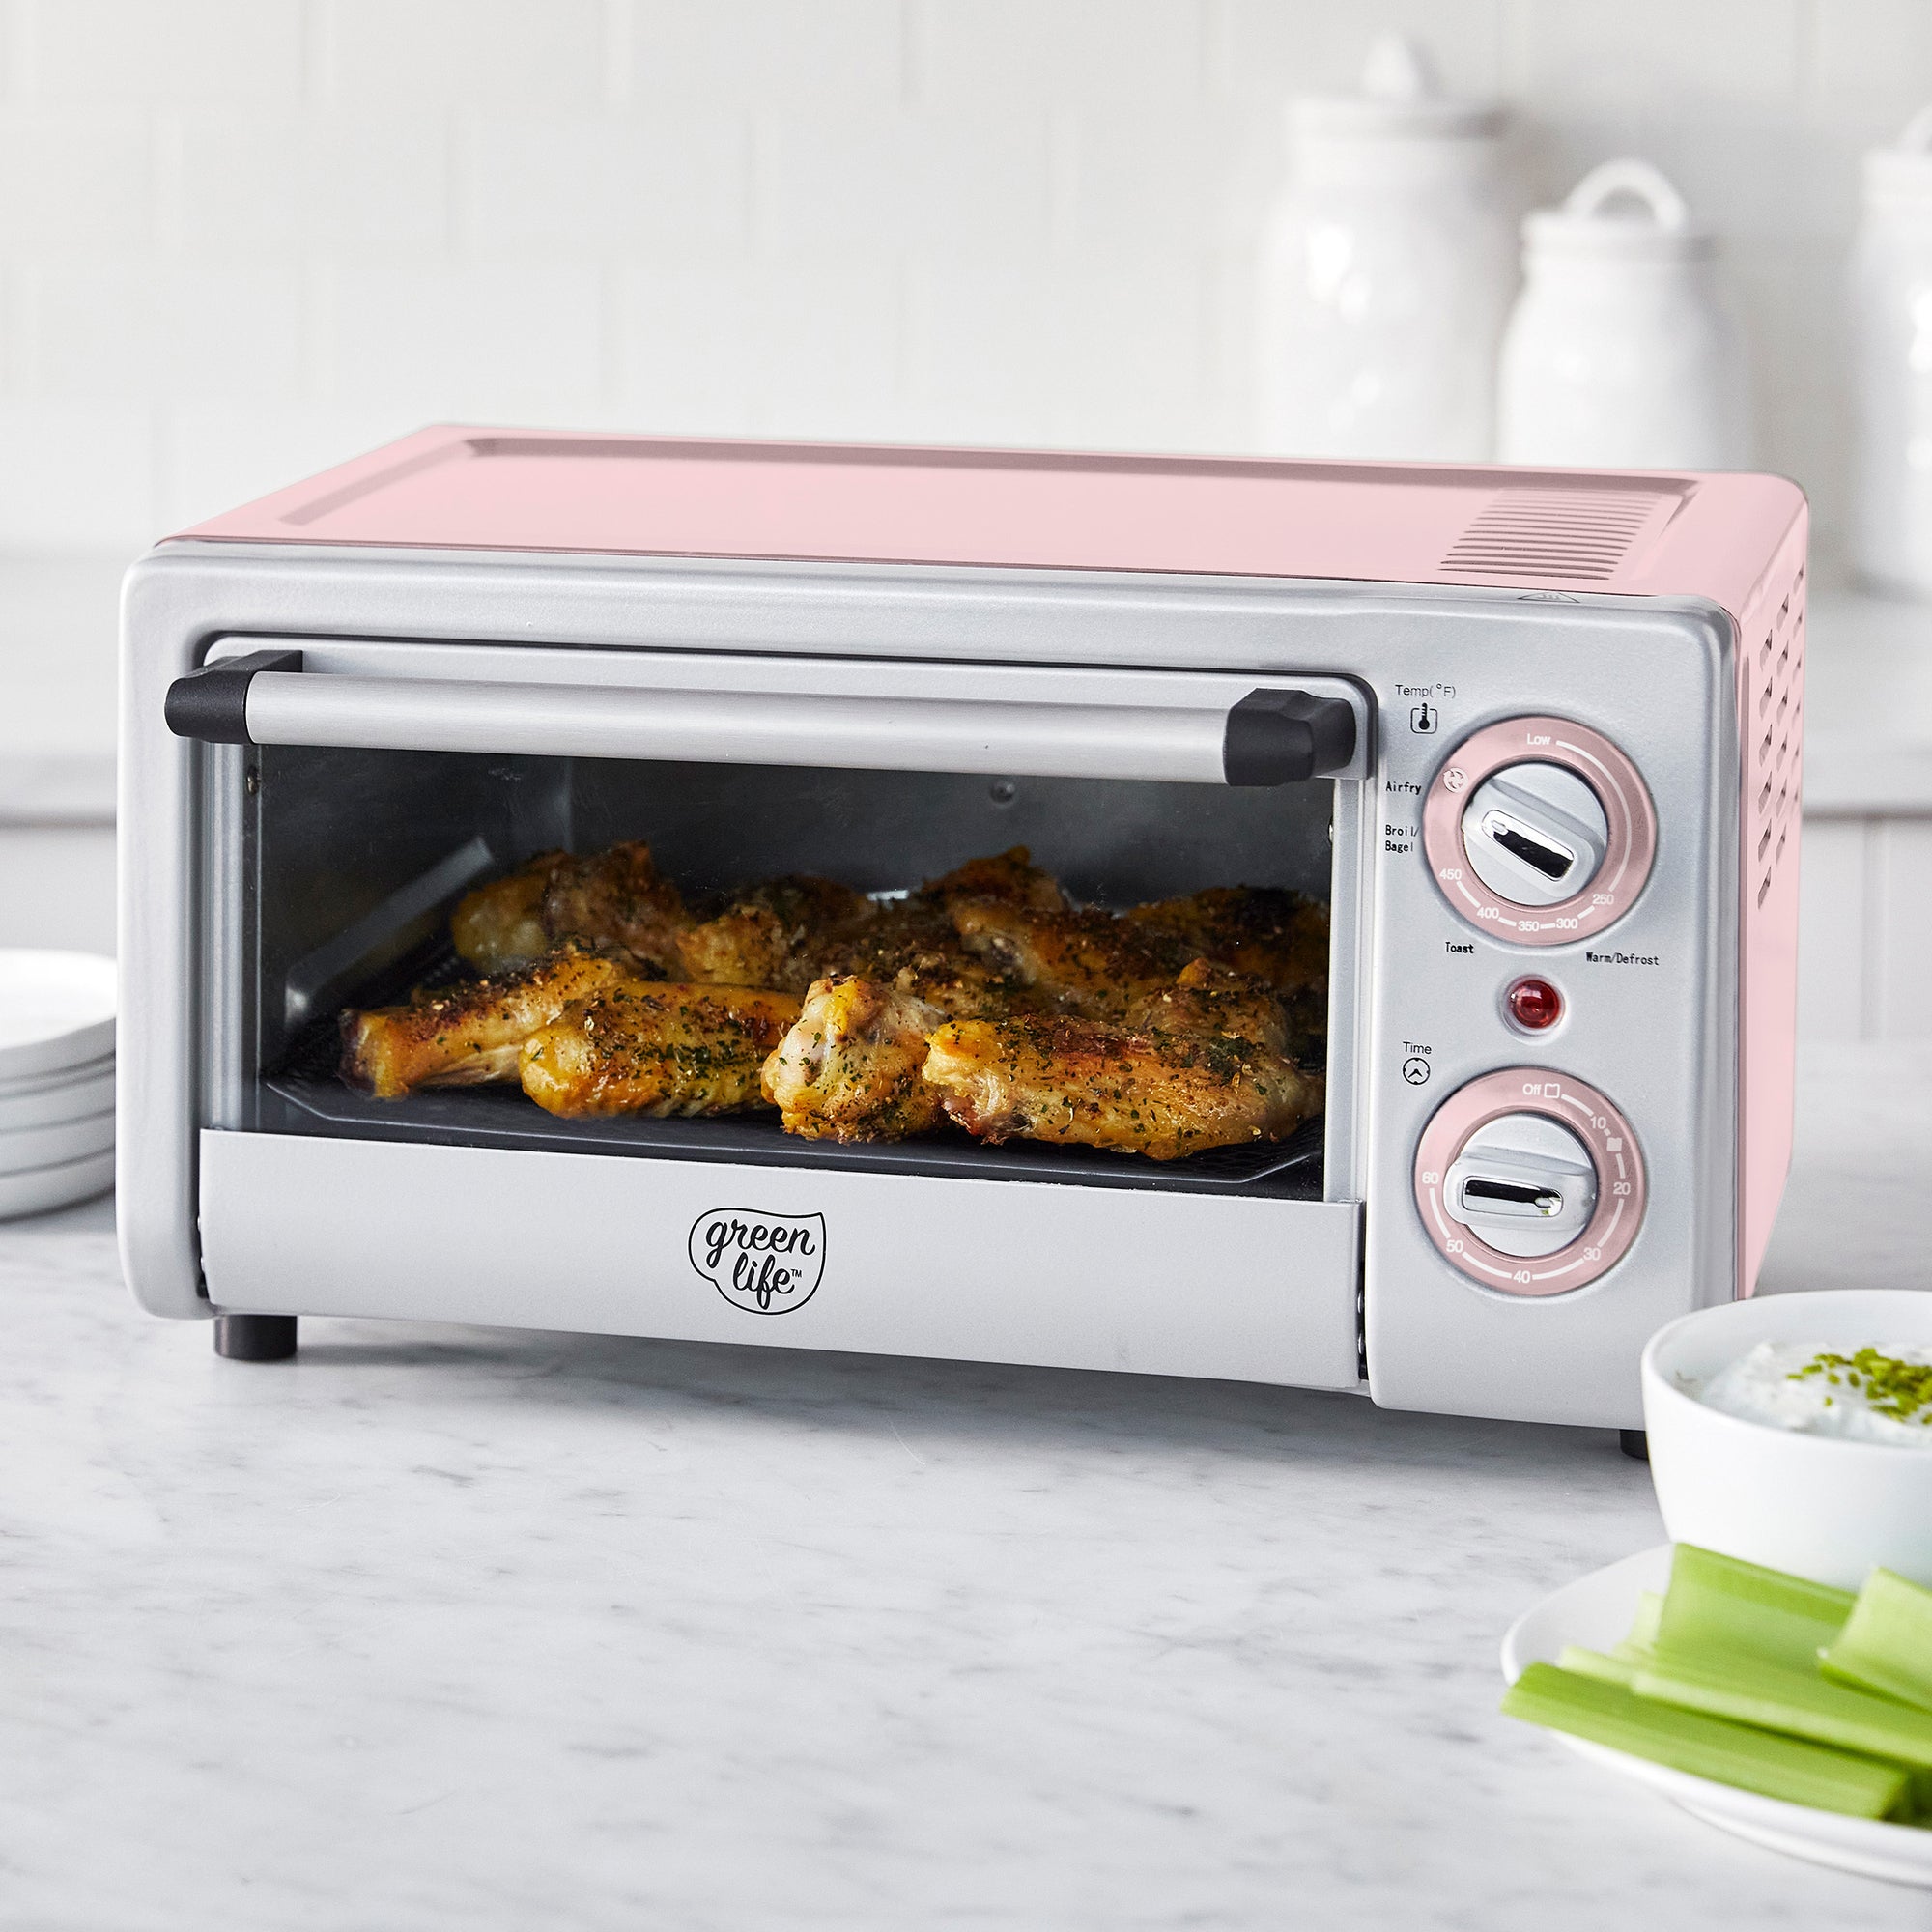 Healthy Non-Toxic Nonstick Cookware - Air Fry Toaster Oven - by GreenLife